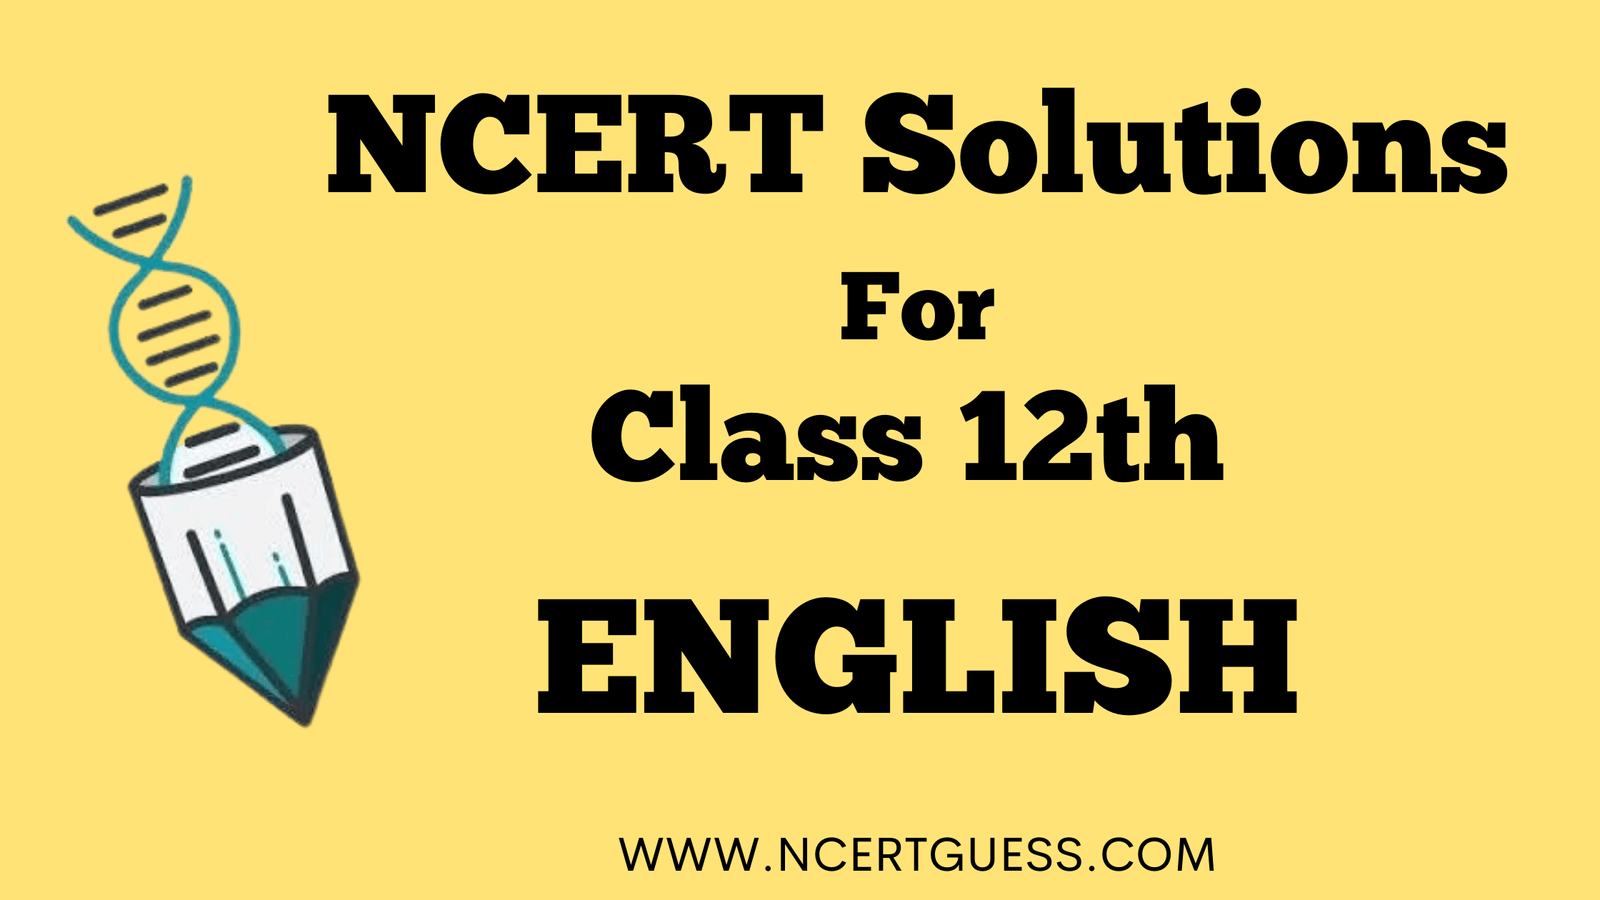 reading-comprehension-class-12-passages-exercises-worksheets-ncertguess